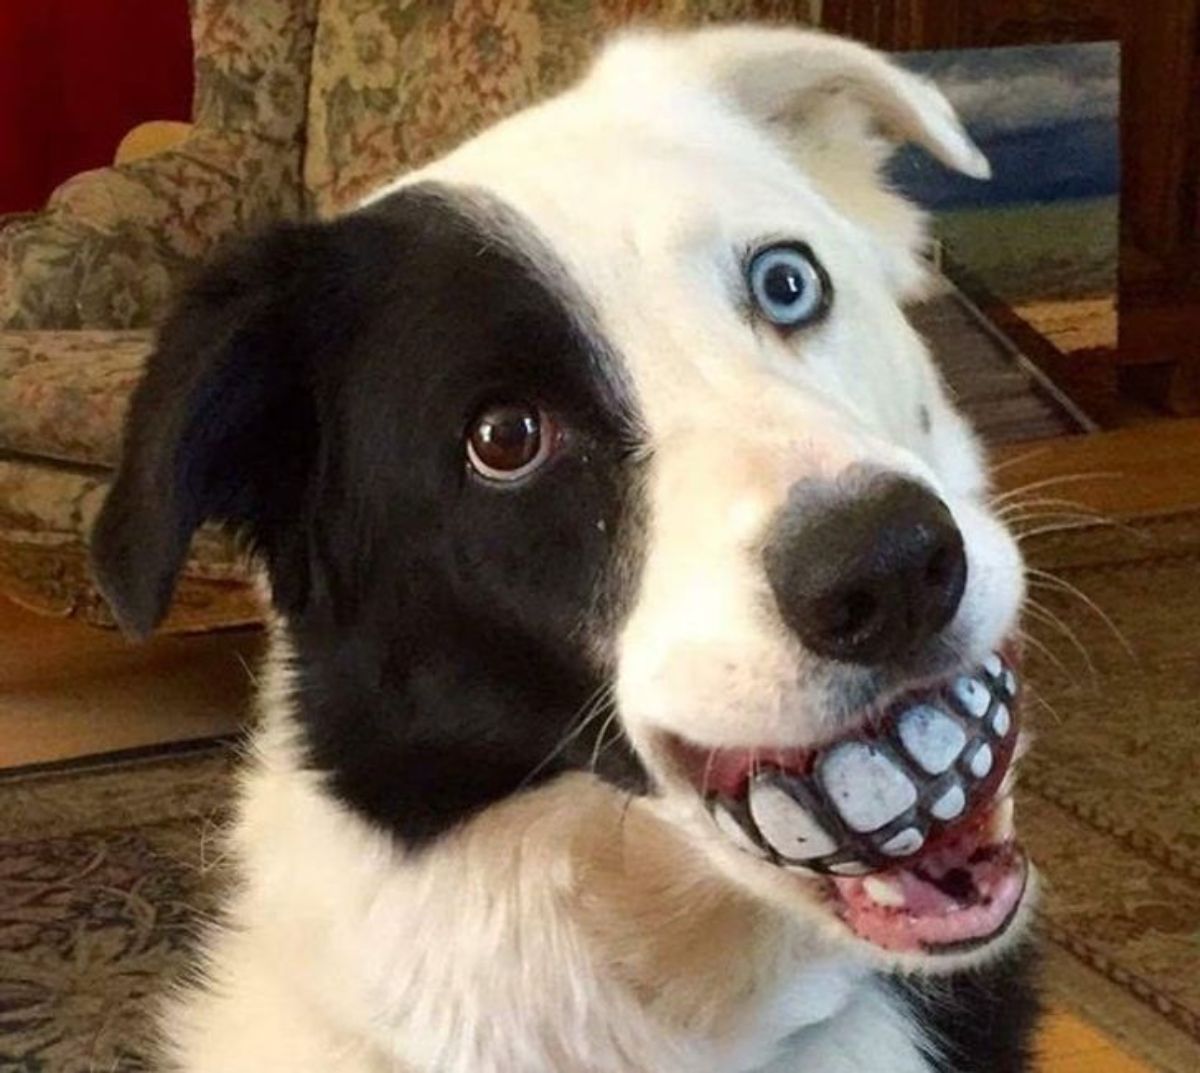 black and white dog holding a ball with teeth painted on it